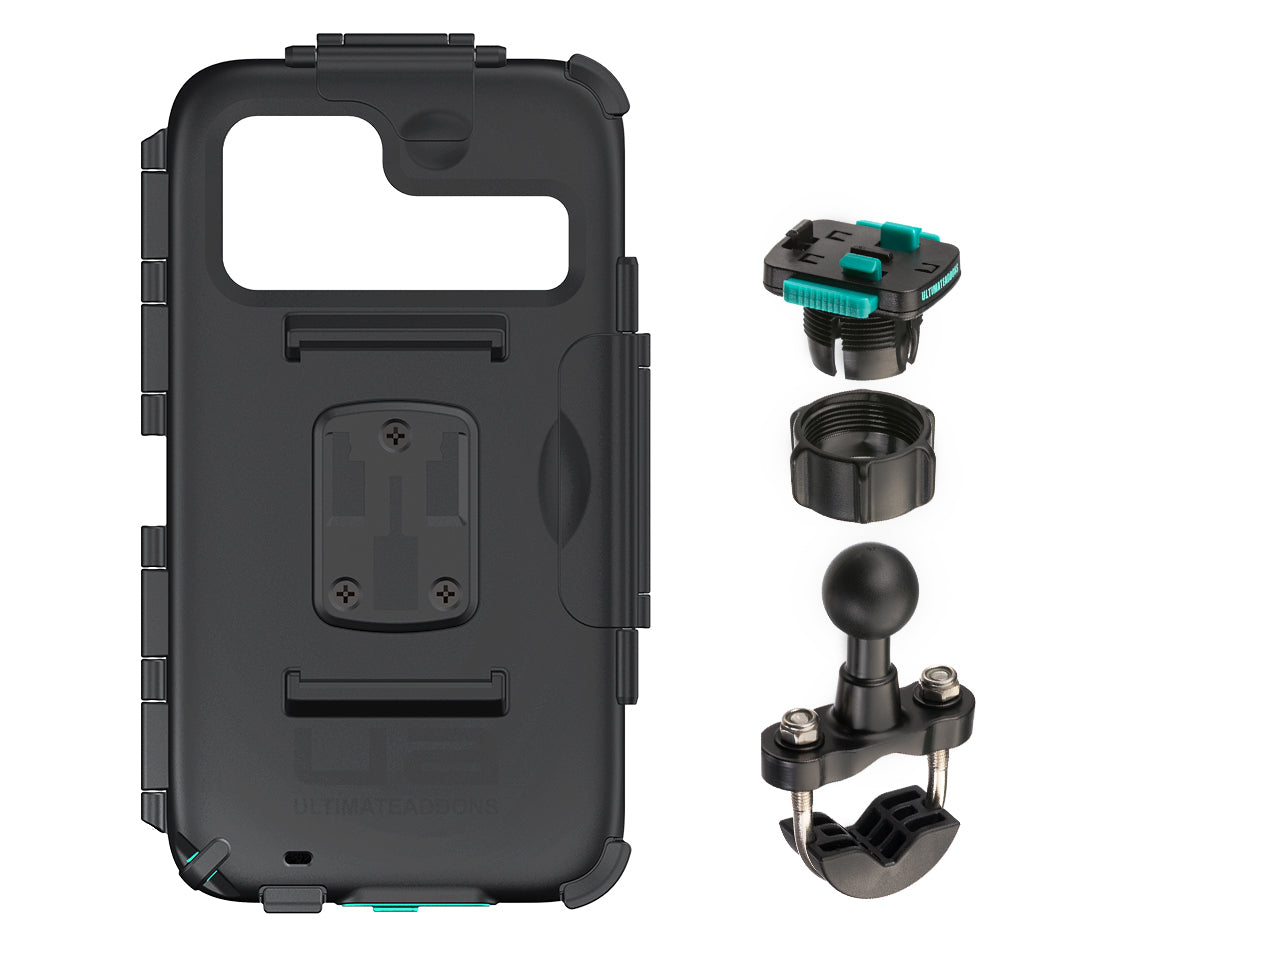 XIAOMI Universal Waterproof Tough Cases & Motorcycle Attachments